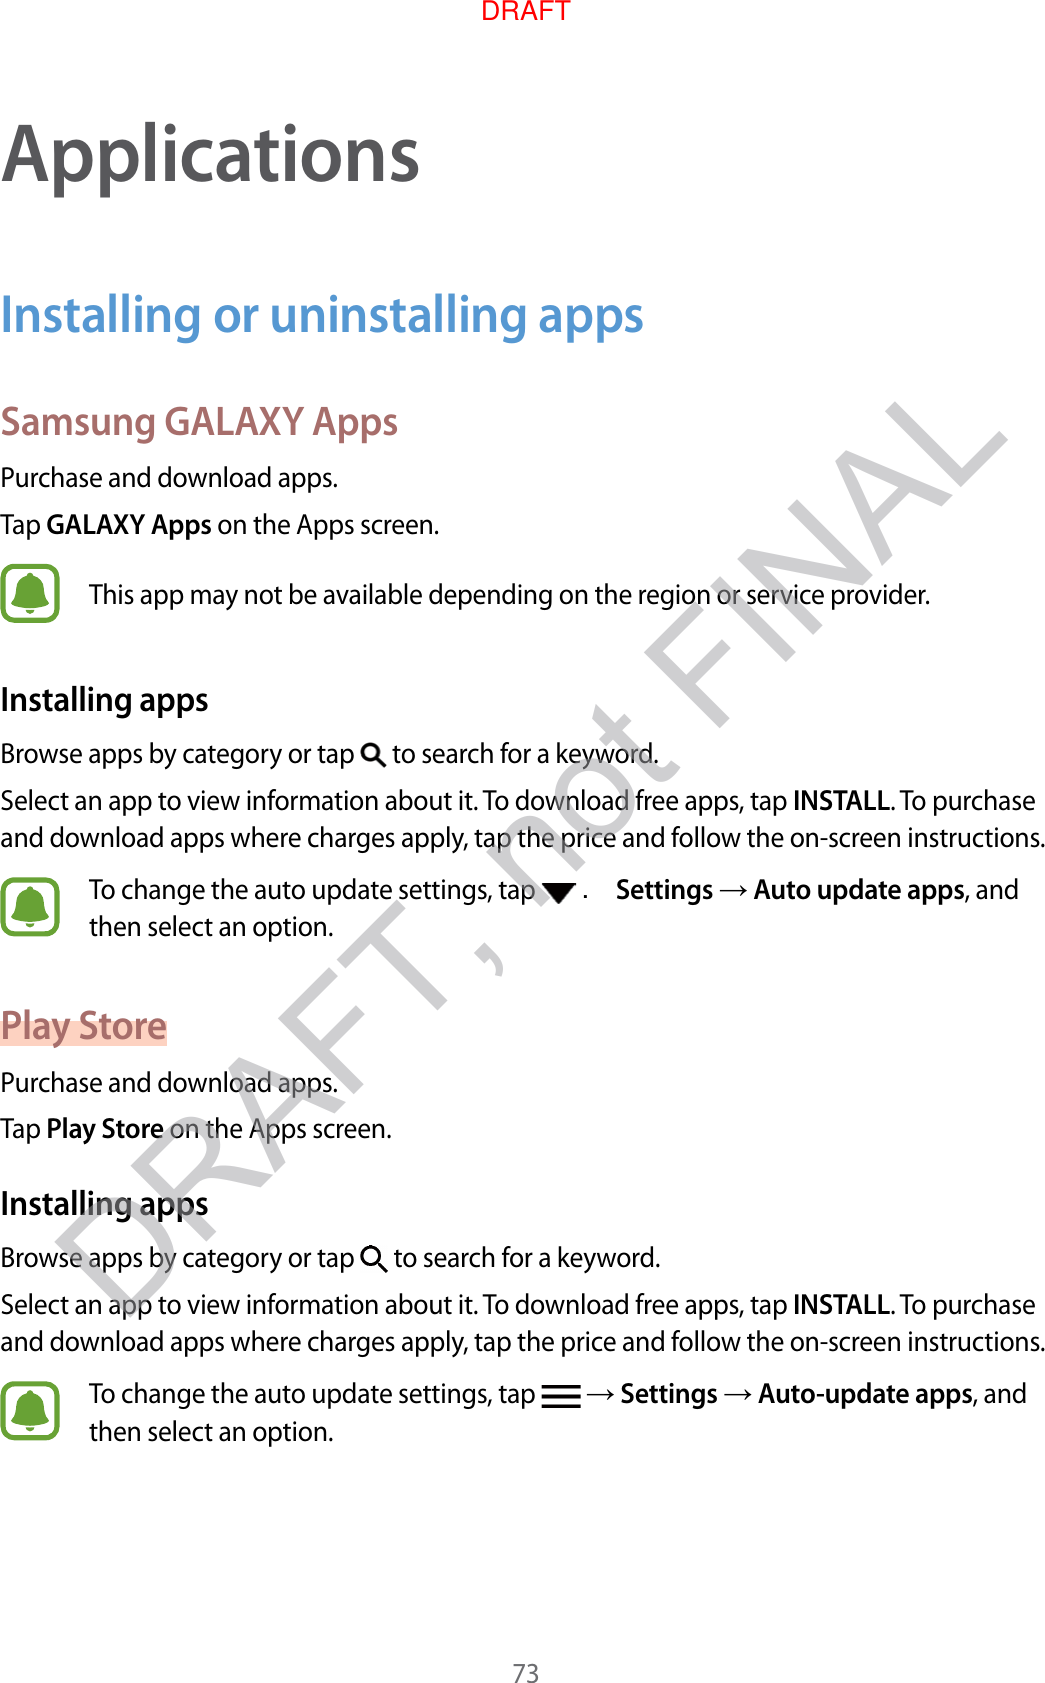 73ApplicationsInstalling or uninstalling appsSamsung GALAXY AppsPurchase and download apps.Tap GALAXY Apps on the Apps screen.This app may not be available depending on the region or service provider.Installing appsBrowse apps by category or tap   to search for a keyword.Select an app to view information about it. To download free apps, tap INSTALL. To purchase and download apps where charges apply, tap the price and follow the on-screen instructions.To change the auto update settings, tap   . Settings  Auto update apps, and then select an option.Play StorePurchase and download apps.Tap Play Store on the Apps screen.Installing appsBrowse apps by category or tap   to search for a keyword.Select an app to view information about it. To download free apps, tap INSTALL. To purchase and download apps where charges apply, tap the price and follow the on-screen instructions.To change the auto update settings, tap    Settings  Auto-update apps, and then select an option.DRAFT, not FINALDRAFT